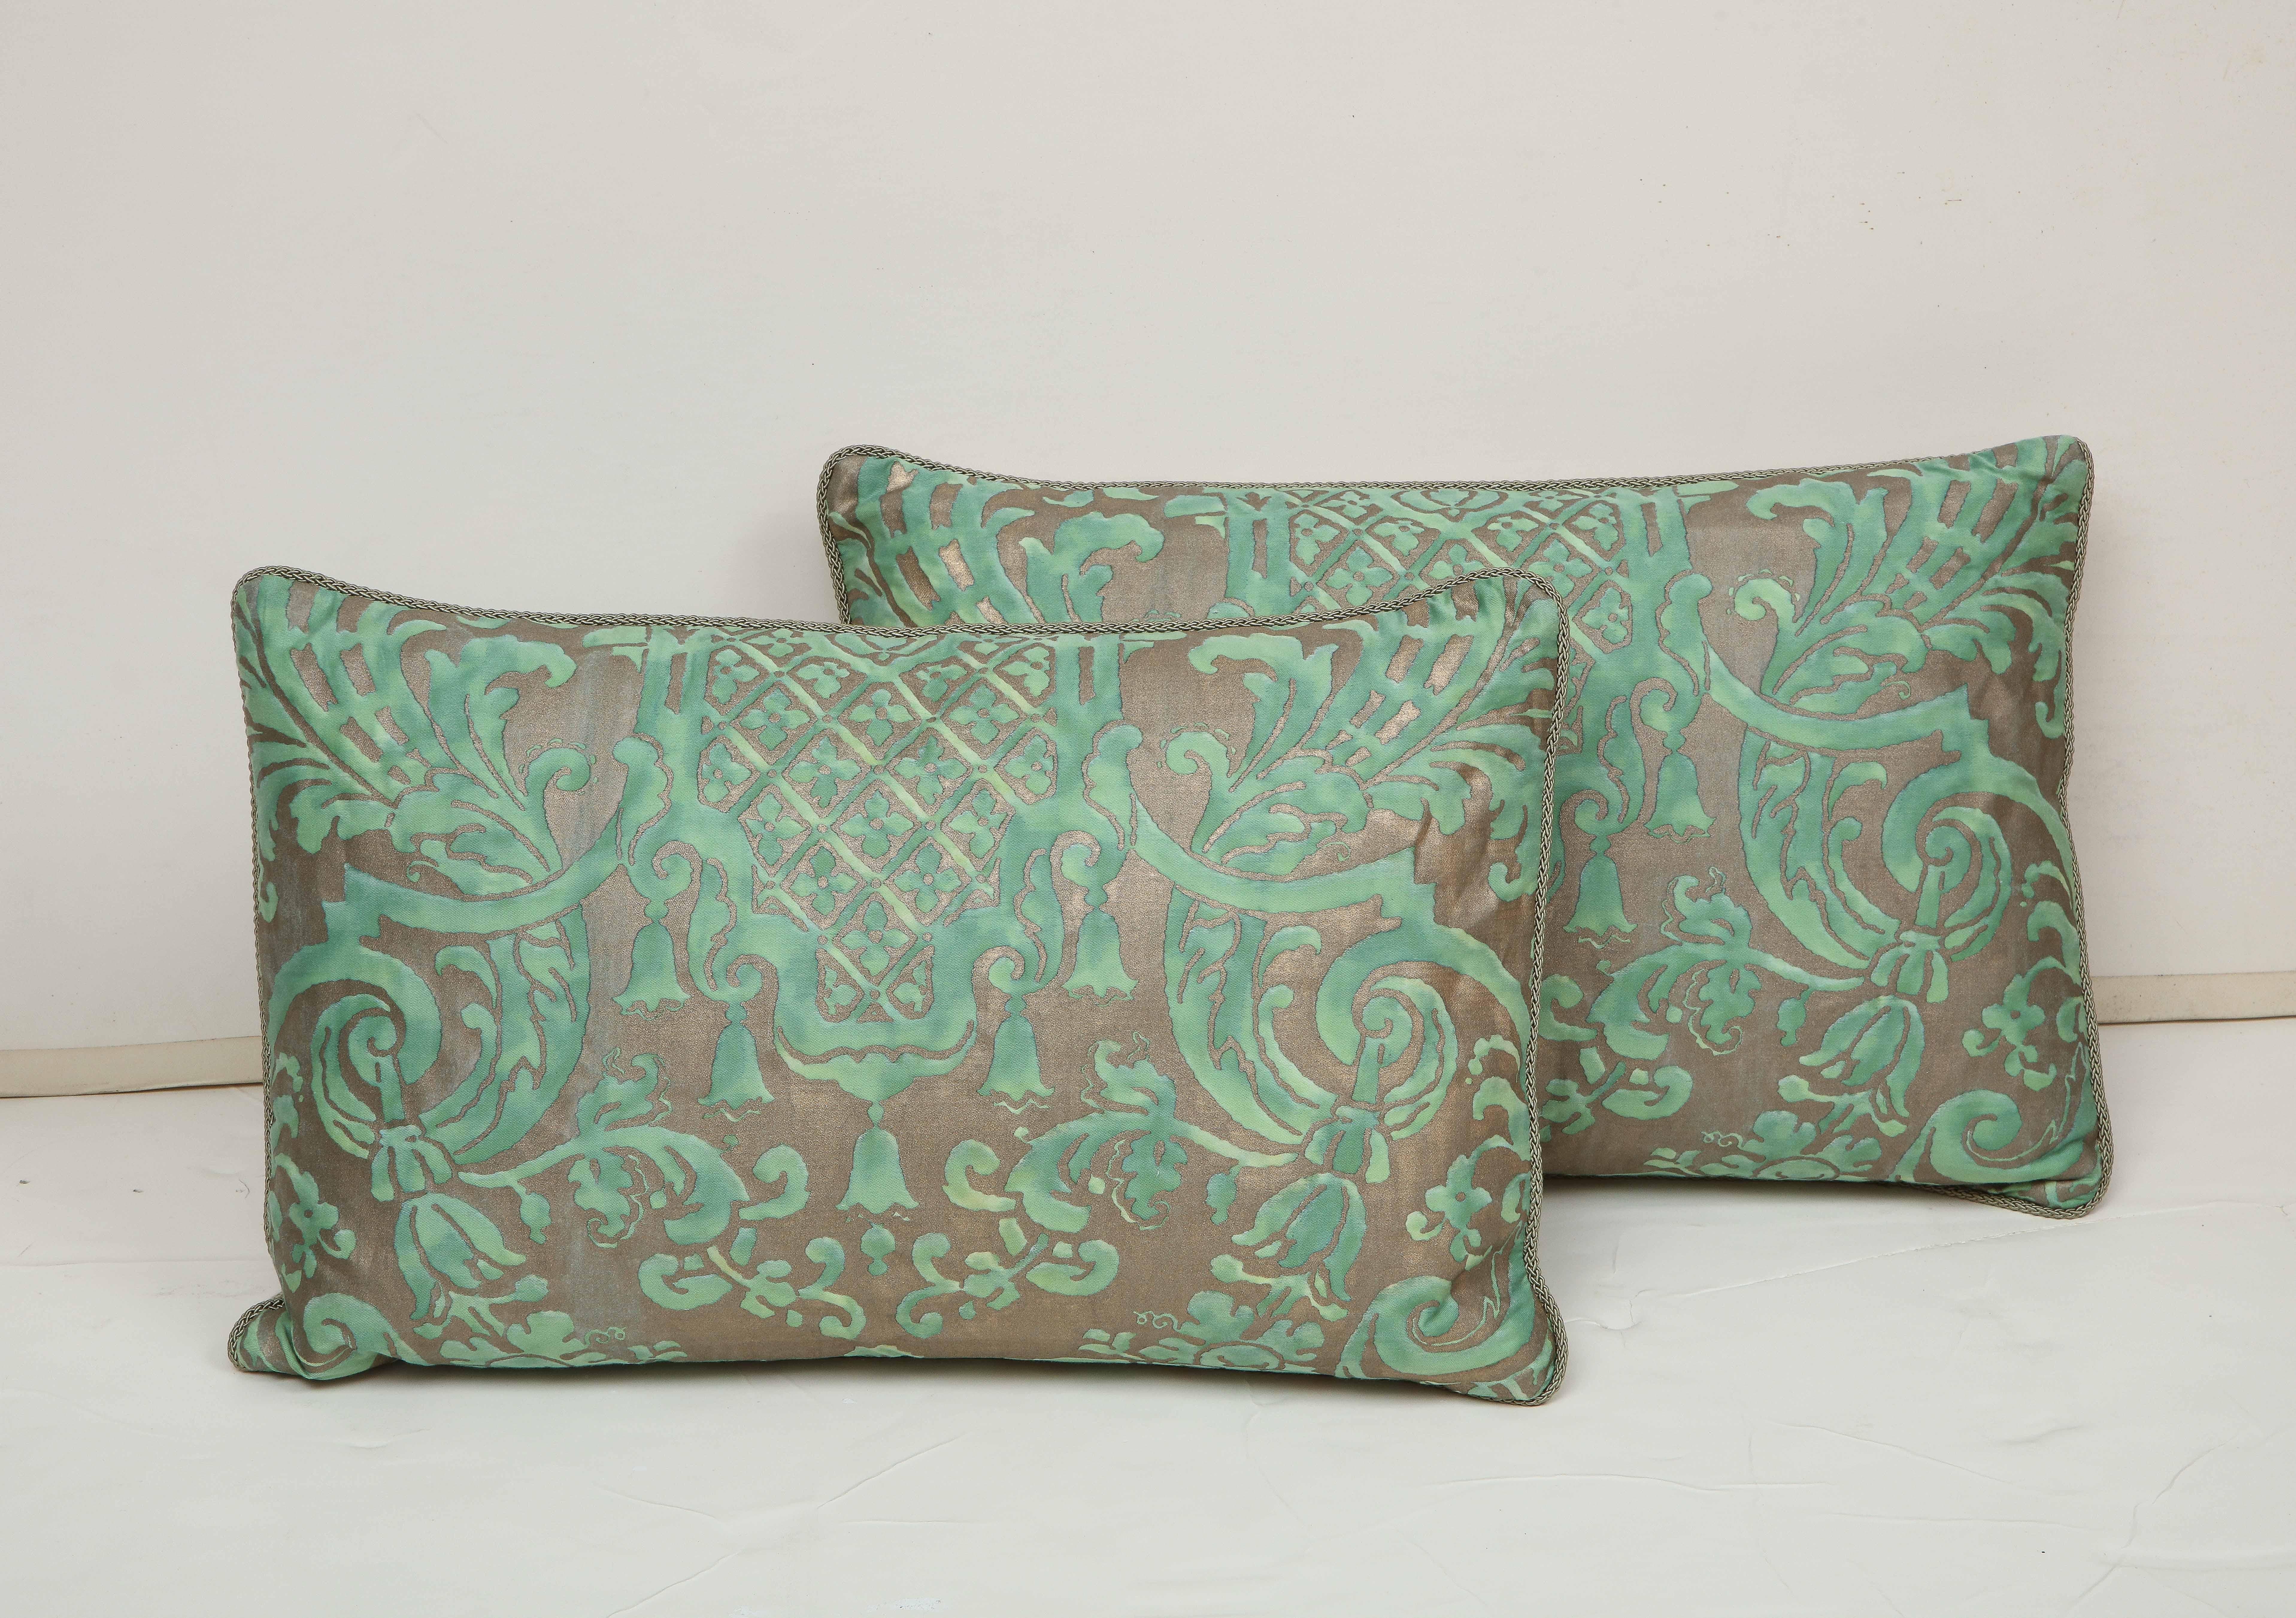 A pair of pillows in a green and grey Fortuny silk backed in a natural linen. Priced separately at $475 each.